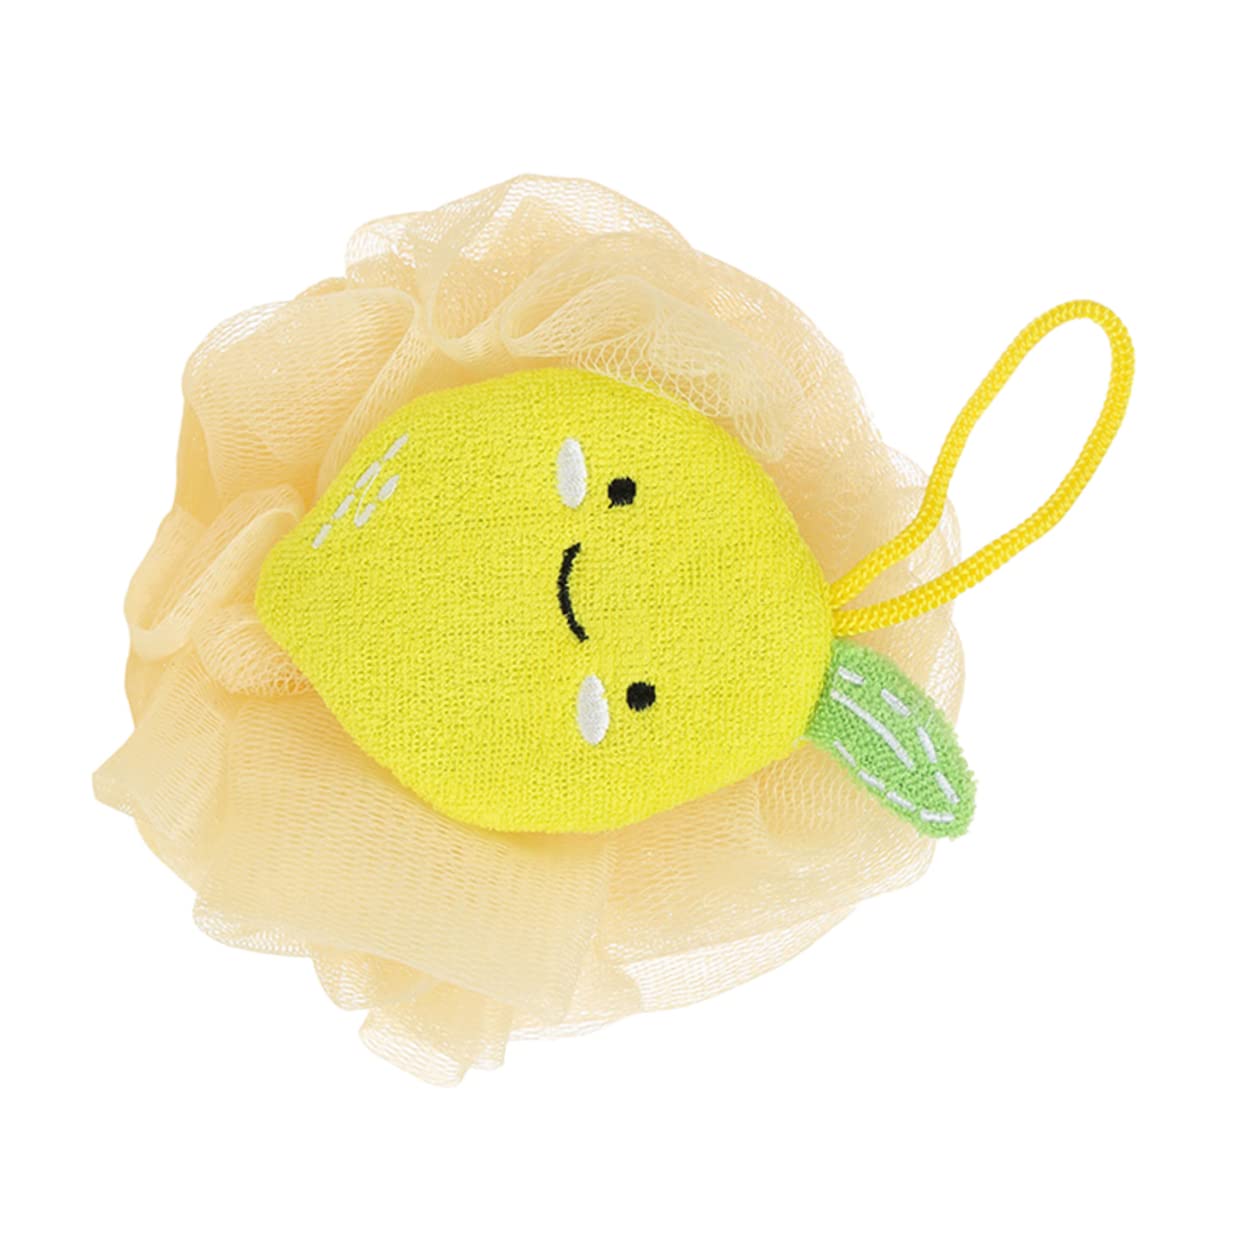 Toyvian Bath Ball Loofah Dish Sponge Sponges for Cleaning Baby